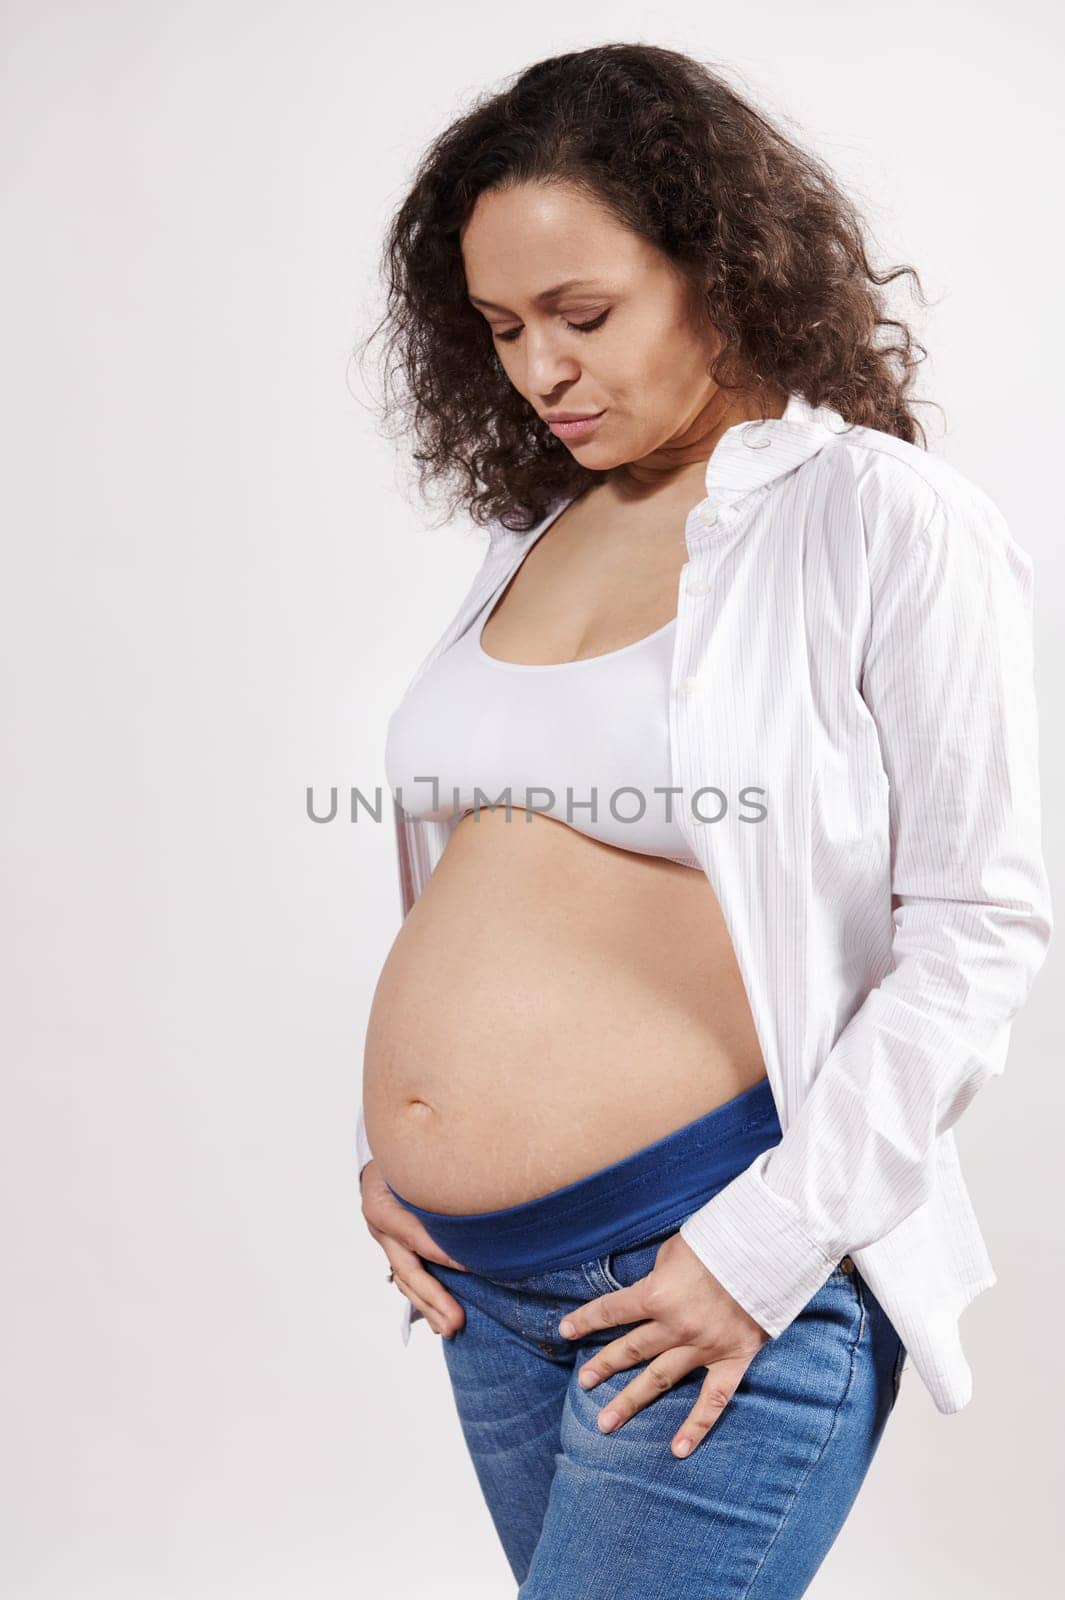 Vertical studio portrait of an attractive ethnic pregnant woman in jeans and white unbuttoned shirt, posing with a bare belly, isolated on a white background. Pregnant fashion. Body positivity